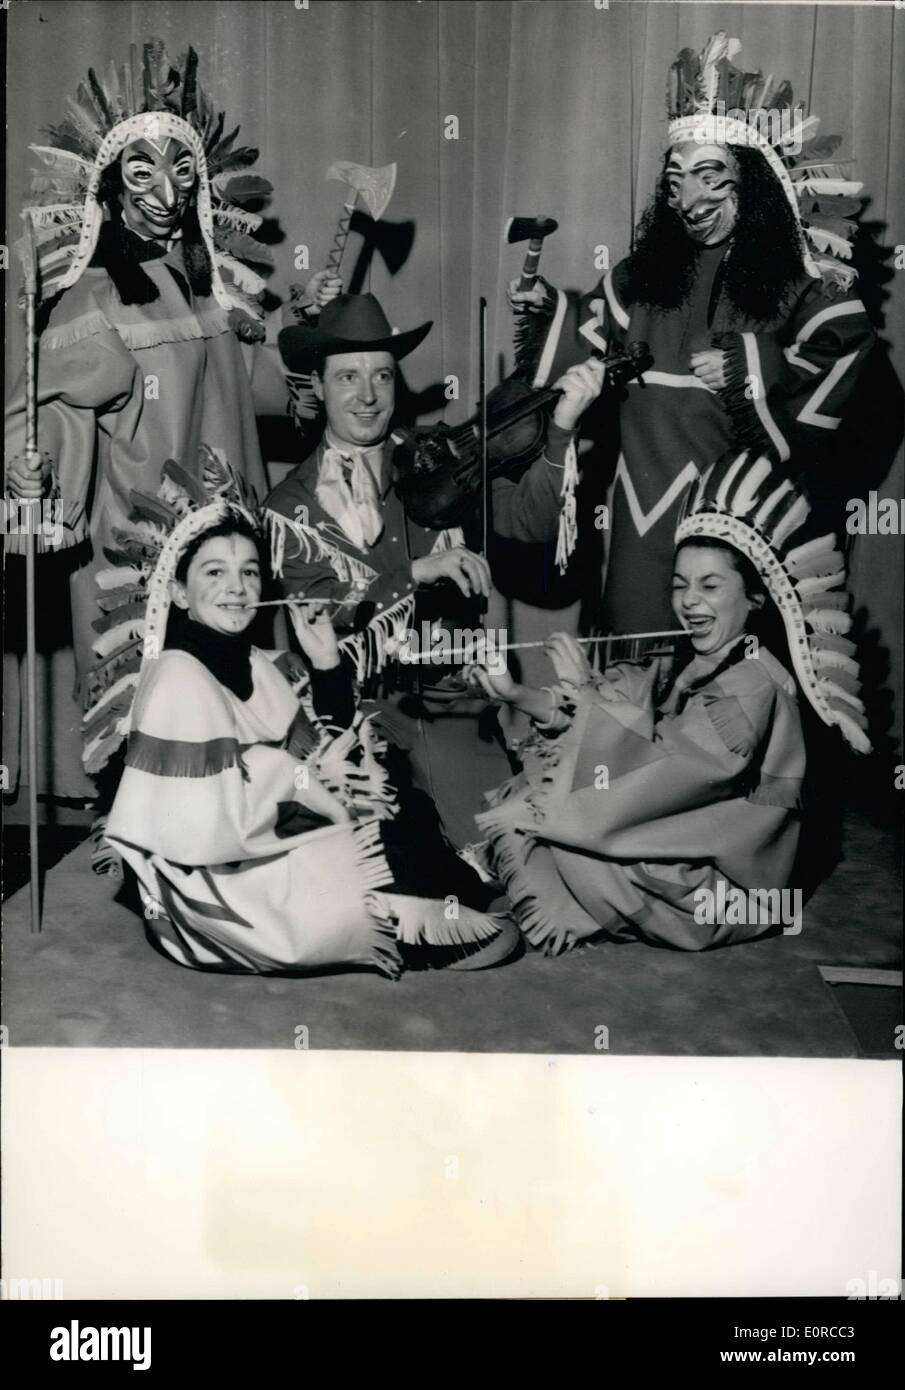 Jan. 01, 1959 - Meet the big chief and the little squaw. Marc Taynor and his band coupled with the election of a Big Chief and the Little Squaw were one of the attractions at Printemps, the famous Paris Department Store. 13-year-old Anne Marie Pinez, elected Little Squaw and 14-year-old Christian Duhamel, the Big Chief with two old red skins. Marc Taynor is seen entertaining them to one of his successes. Jan. 16/59 Stock Photo